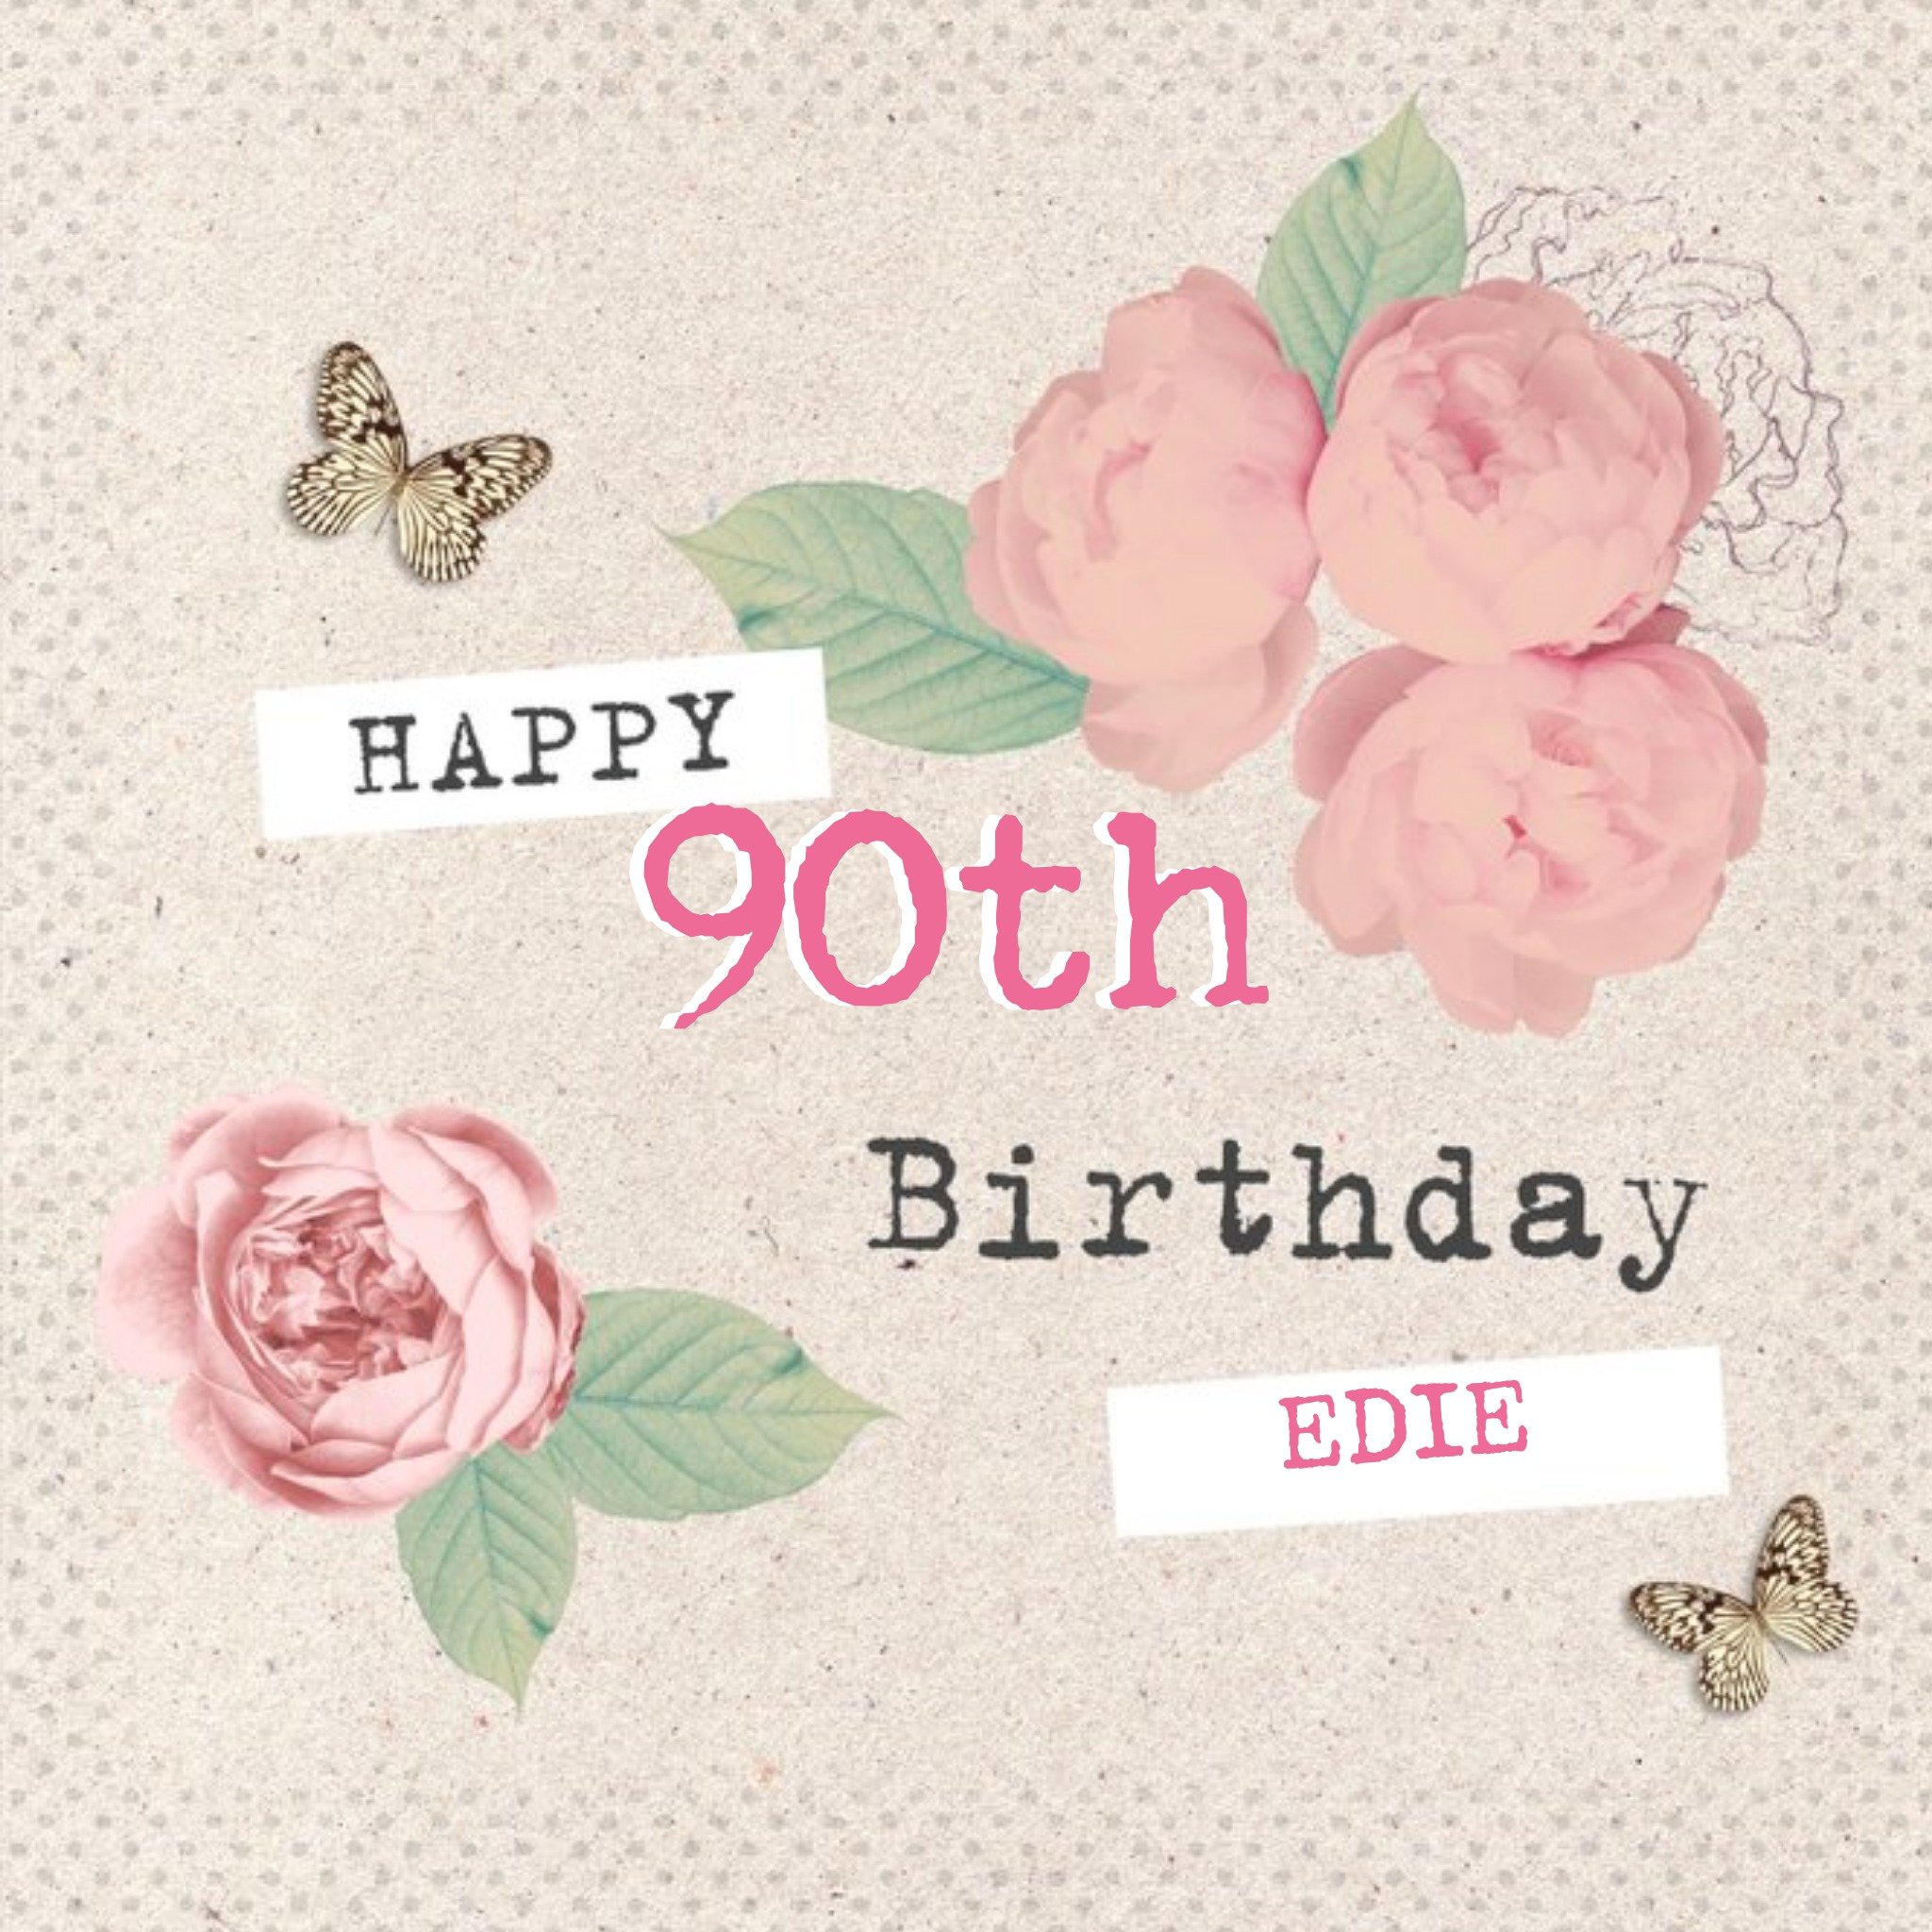 Moonpig Vintage Roses And Fluttering Butterflies Happy 90th Birthday Card, Large